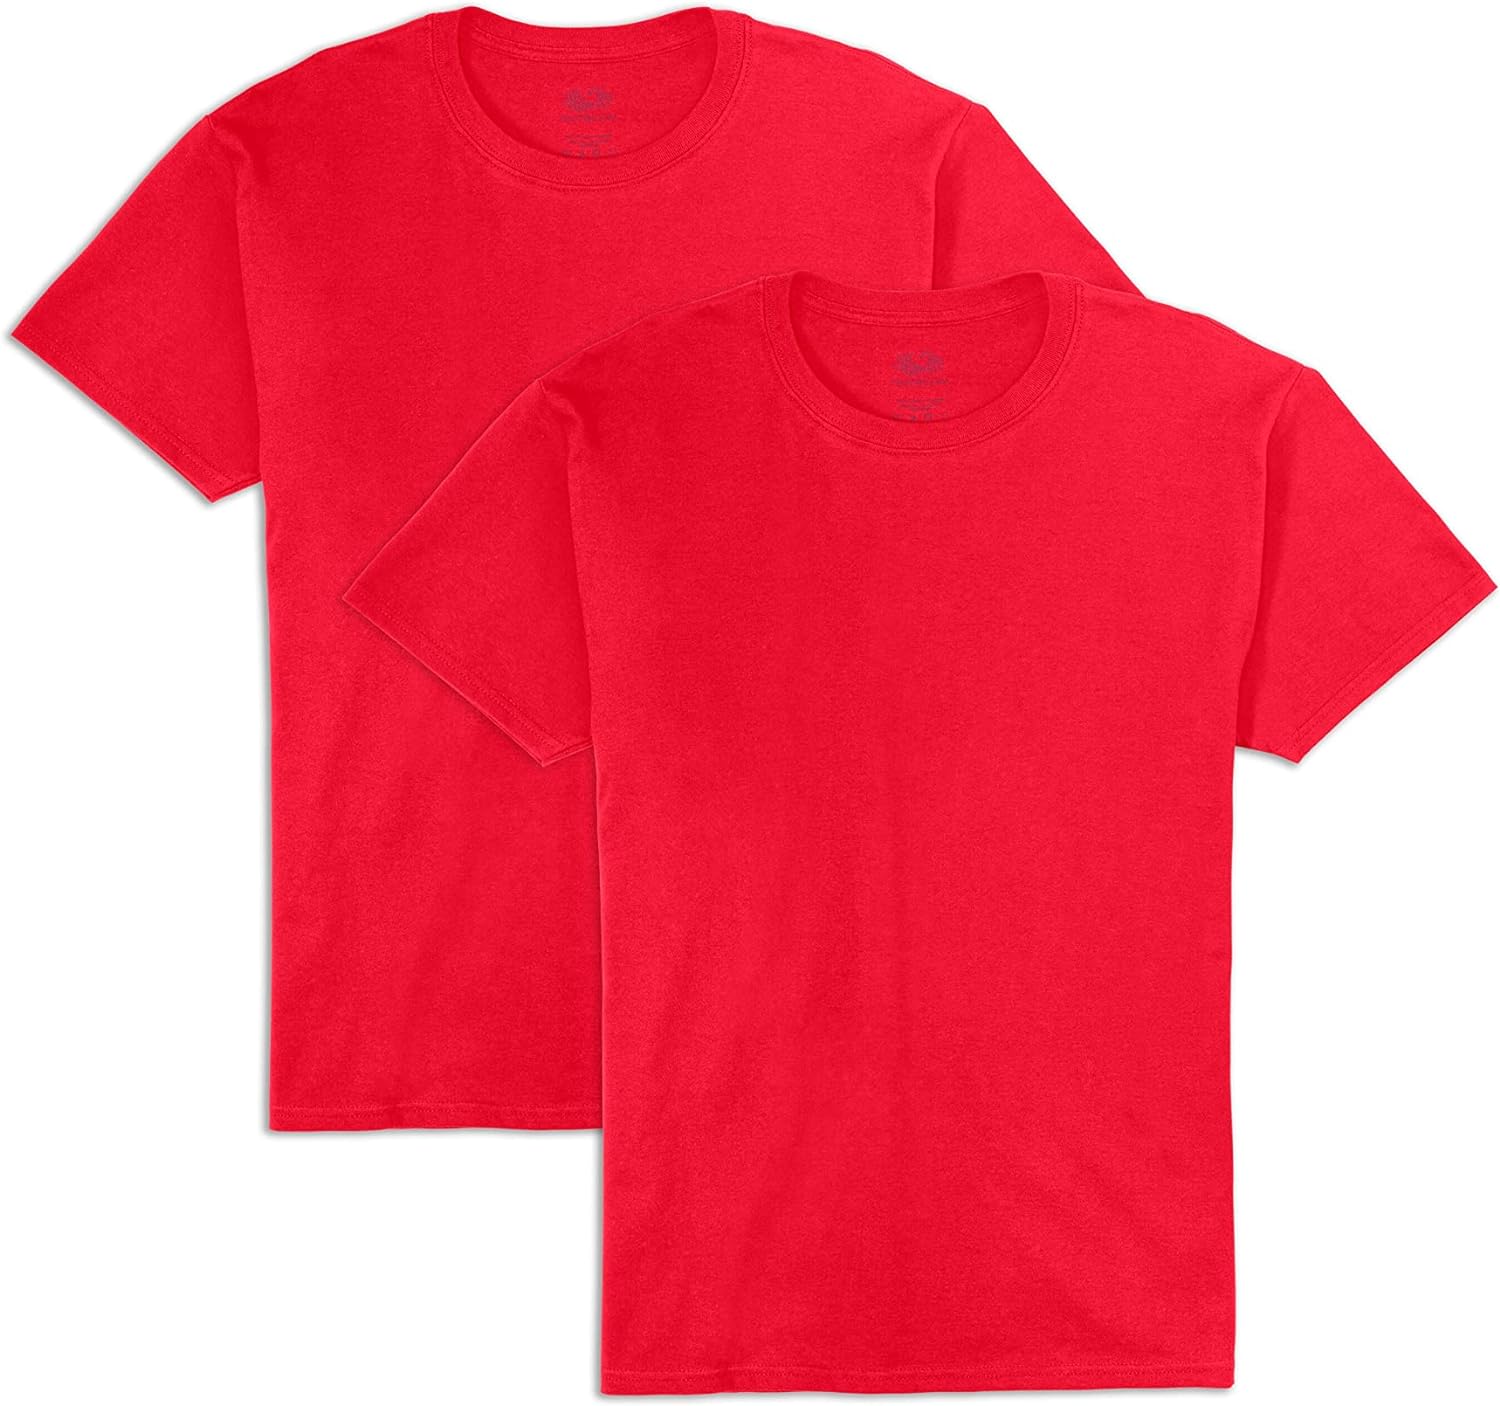 Fruit of the Loom Men' Eversoft Cotton T Shirts, Breathable & Moisture Wicking with Odor Control, Sizes S-4x